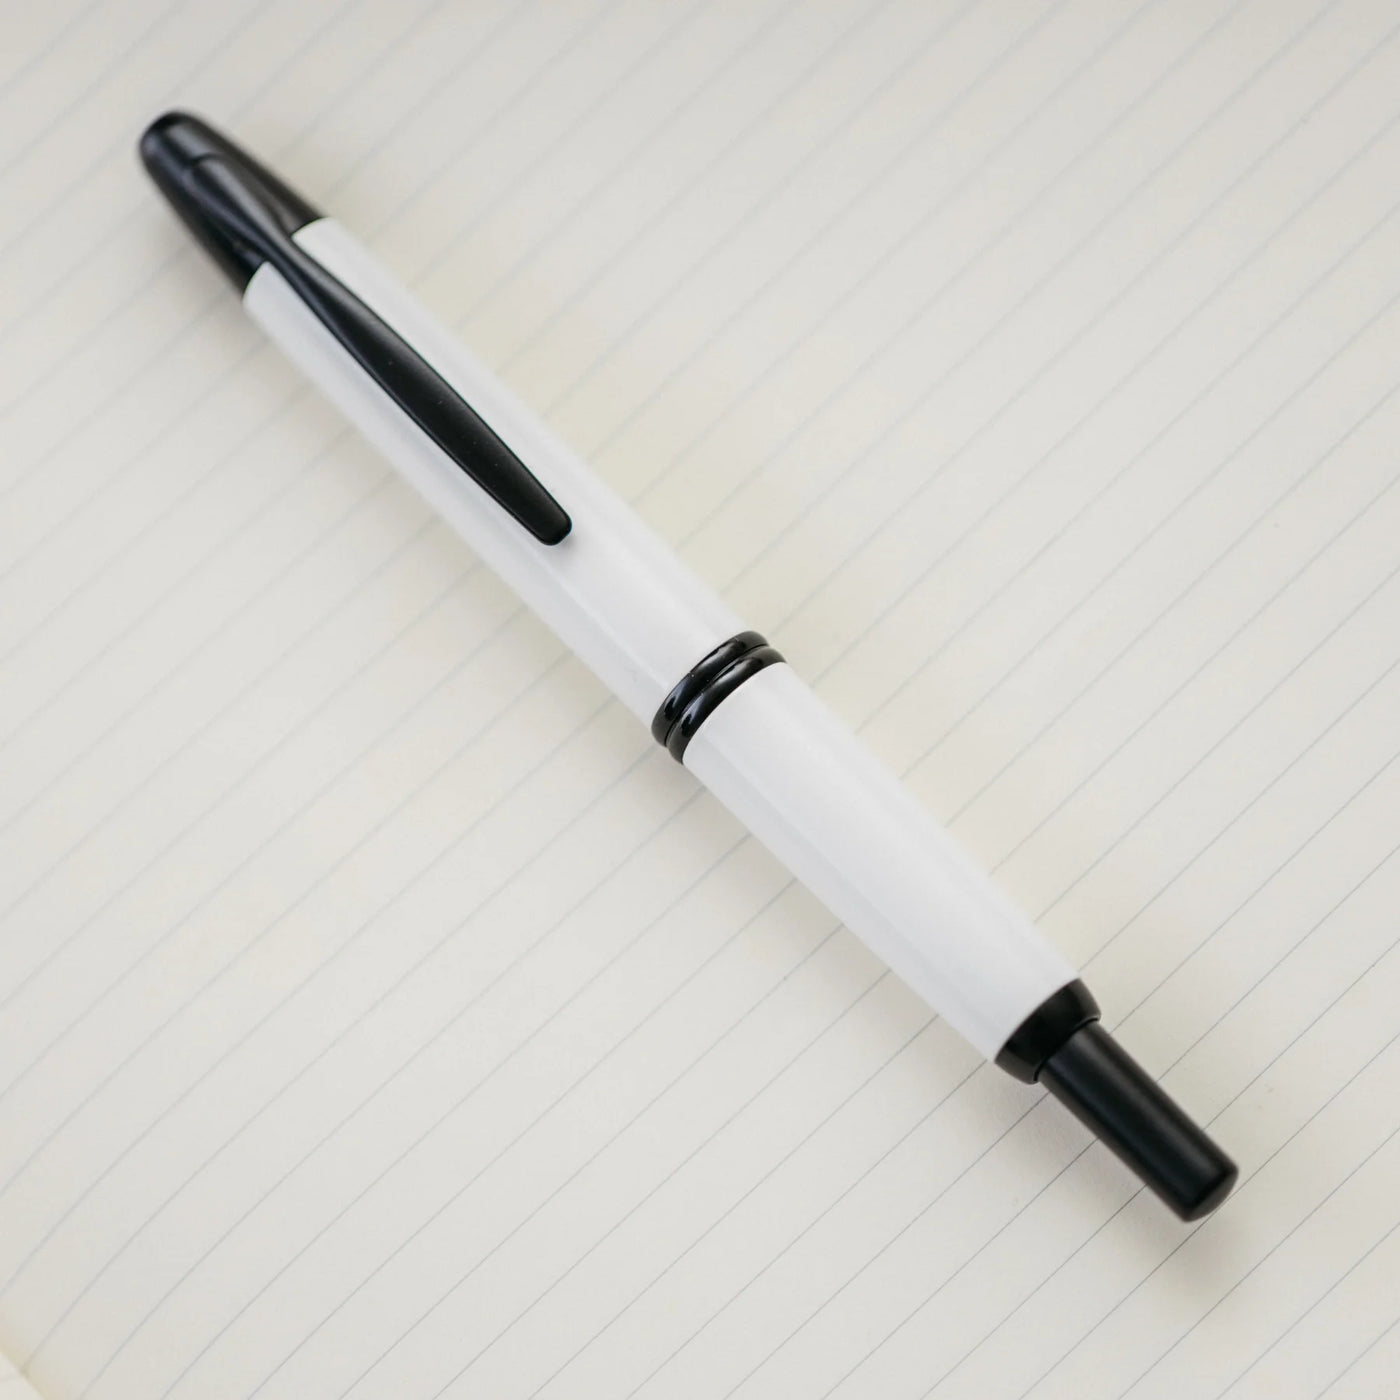 Best Pens for Writing: 14 Options to Choose From